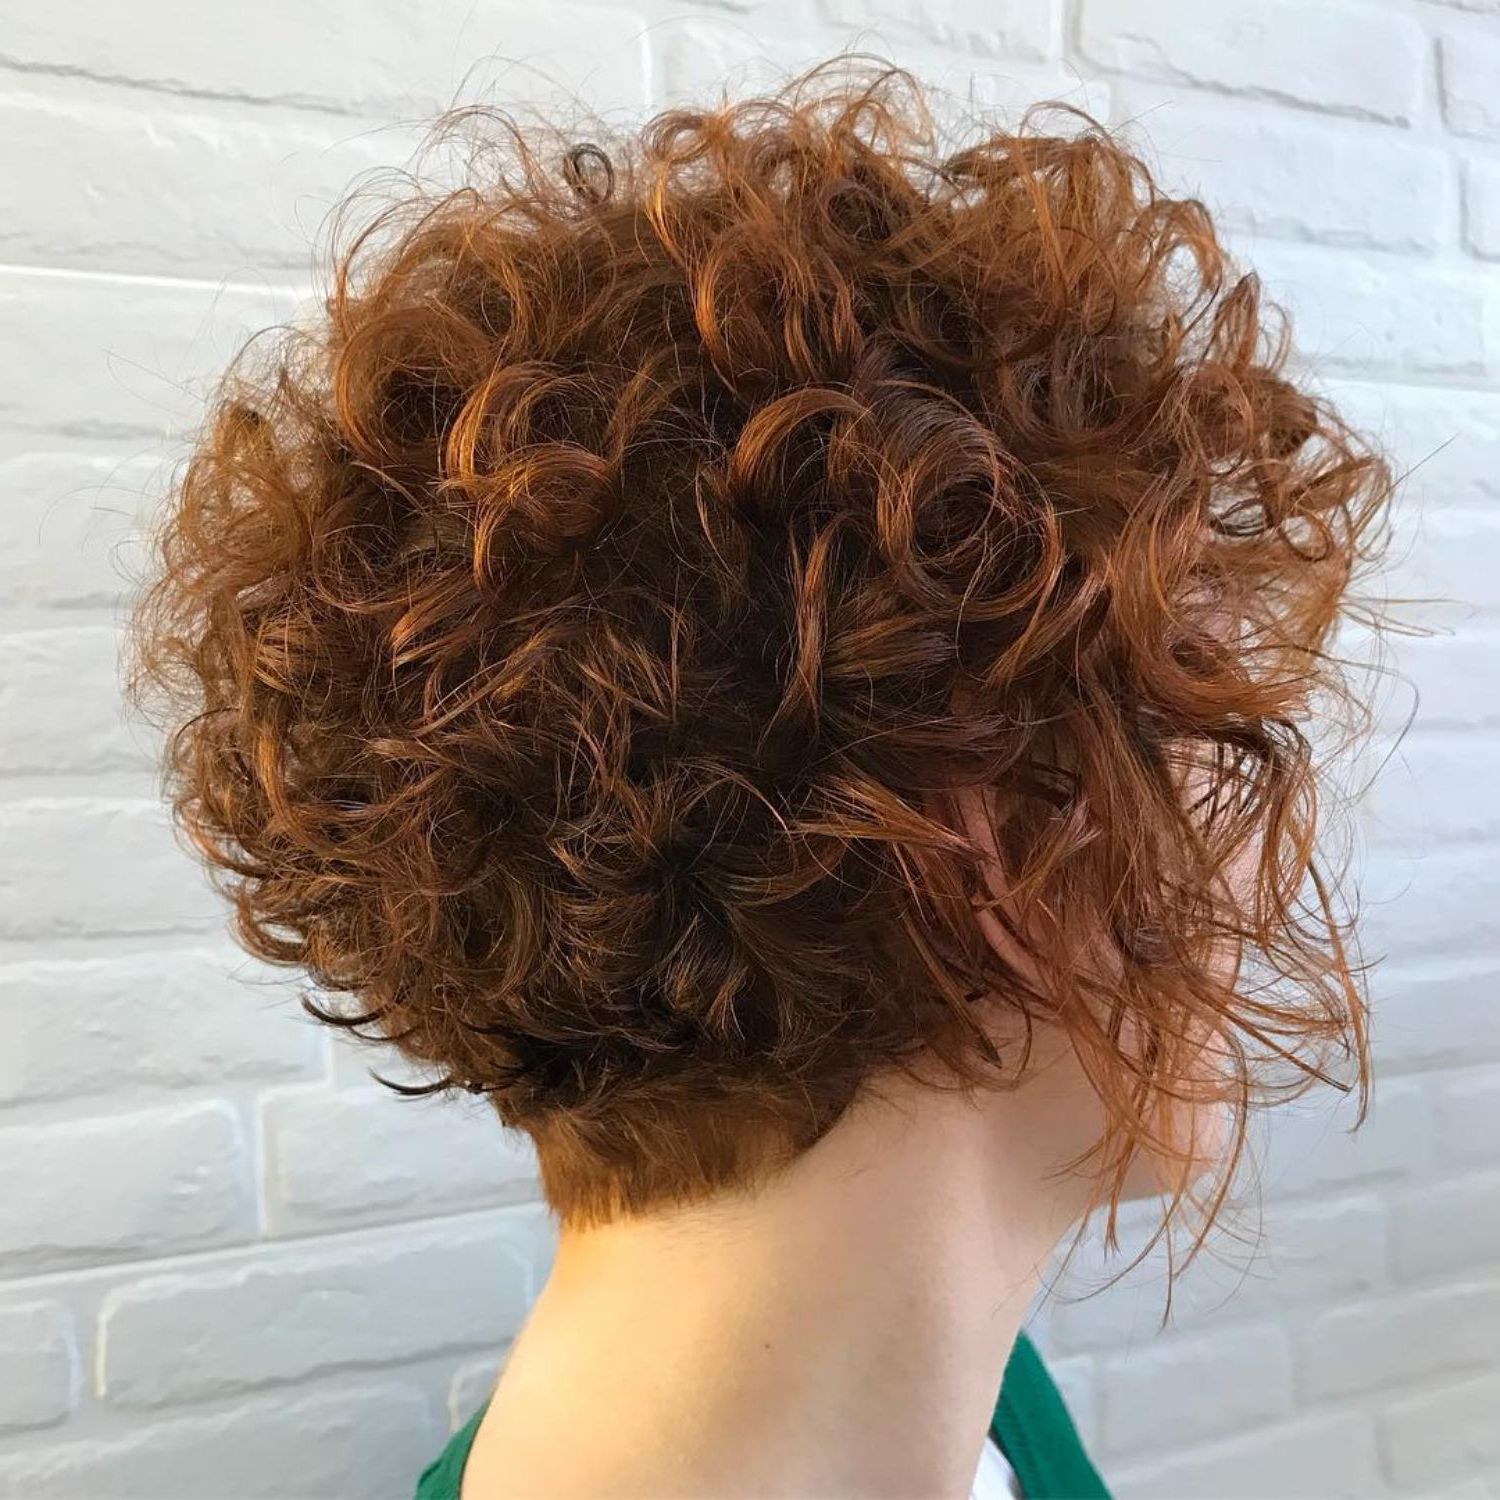 60 Most Delightful Short Wavy Hairstyles In 2018 | Hair Ideas With Tapered Brown Pixie Hairstyles With Ginger Curls (Gallery 5 of 20)